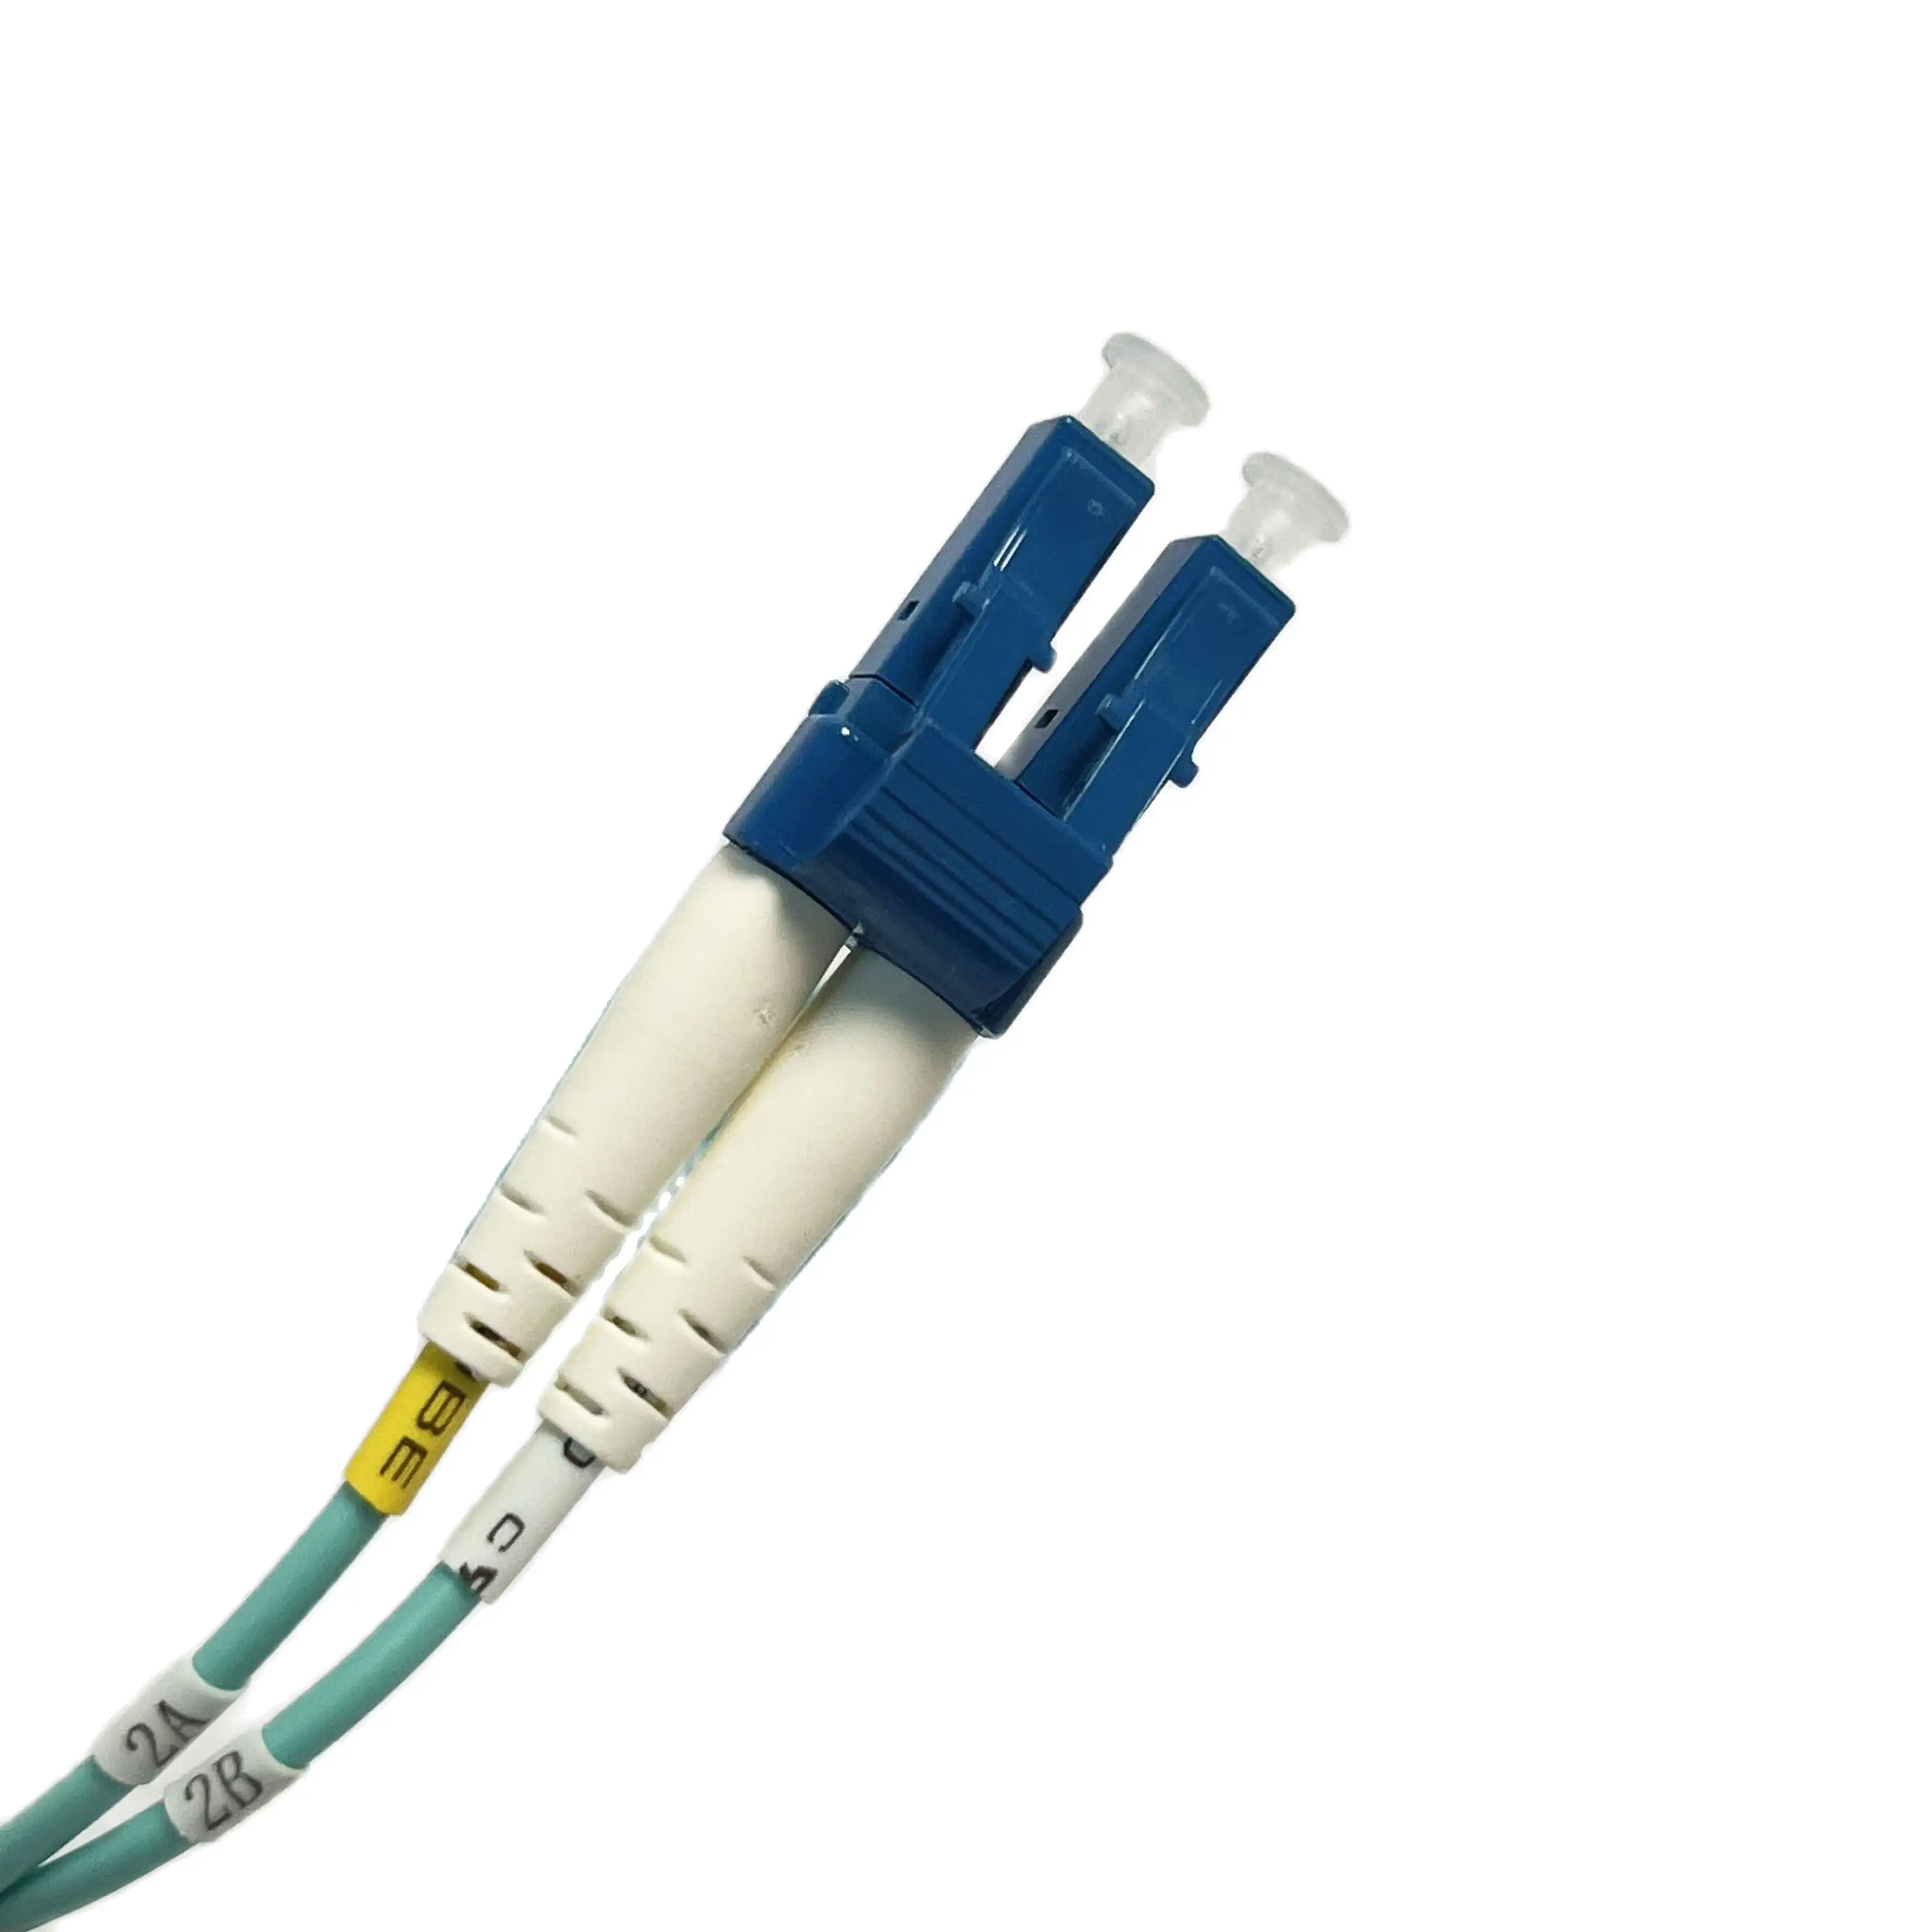 3M LC to LC Optic Fiber Patch Cable 10G Multimode Duplex OM3 PVC 2.0 50/125 adop lc to lc om4 fiber patch cable 40gb 100gb fiber optic cables lszh 1 300 mete duplex 50 125um multimode